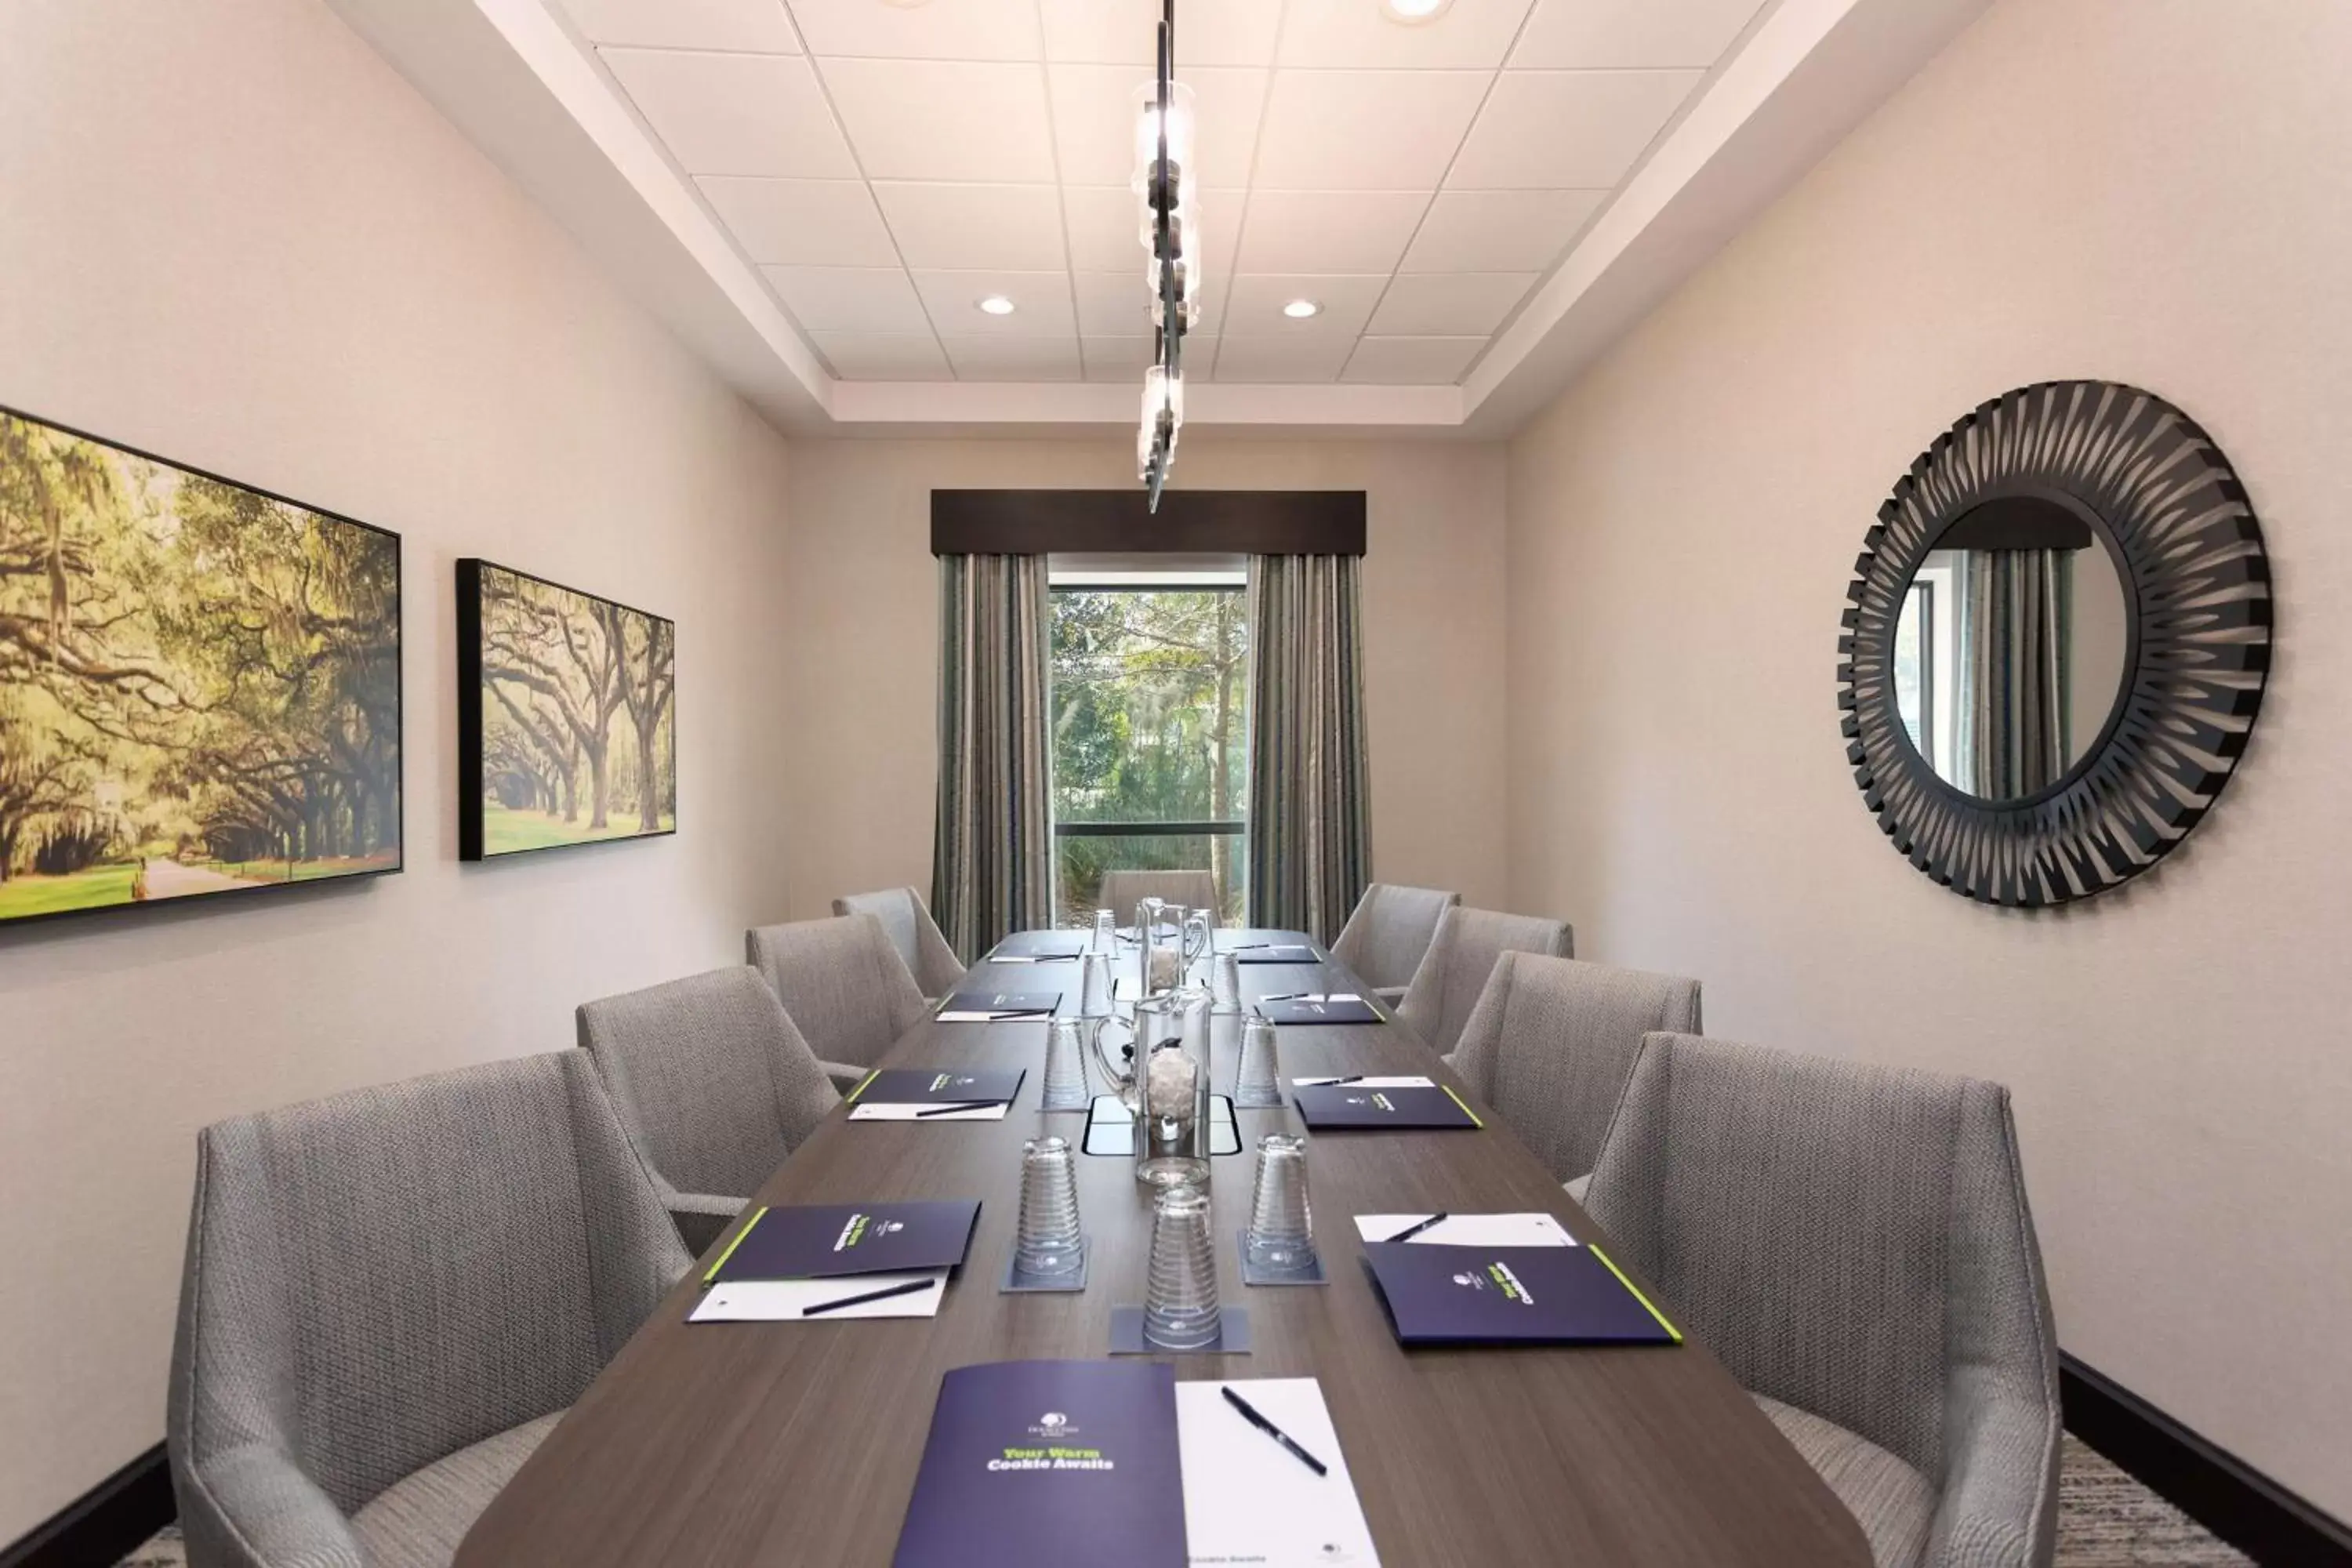 Meeting/conference room in DoubleTree by Hilton Charleston Mount Pleasant